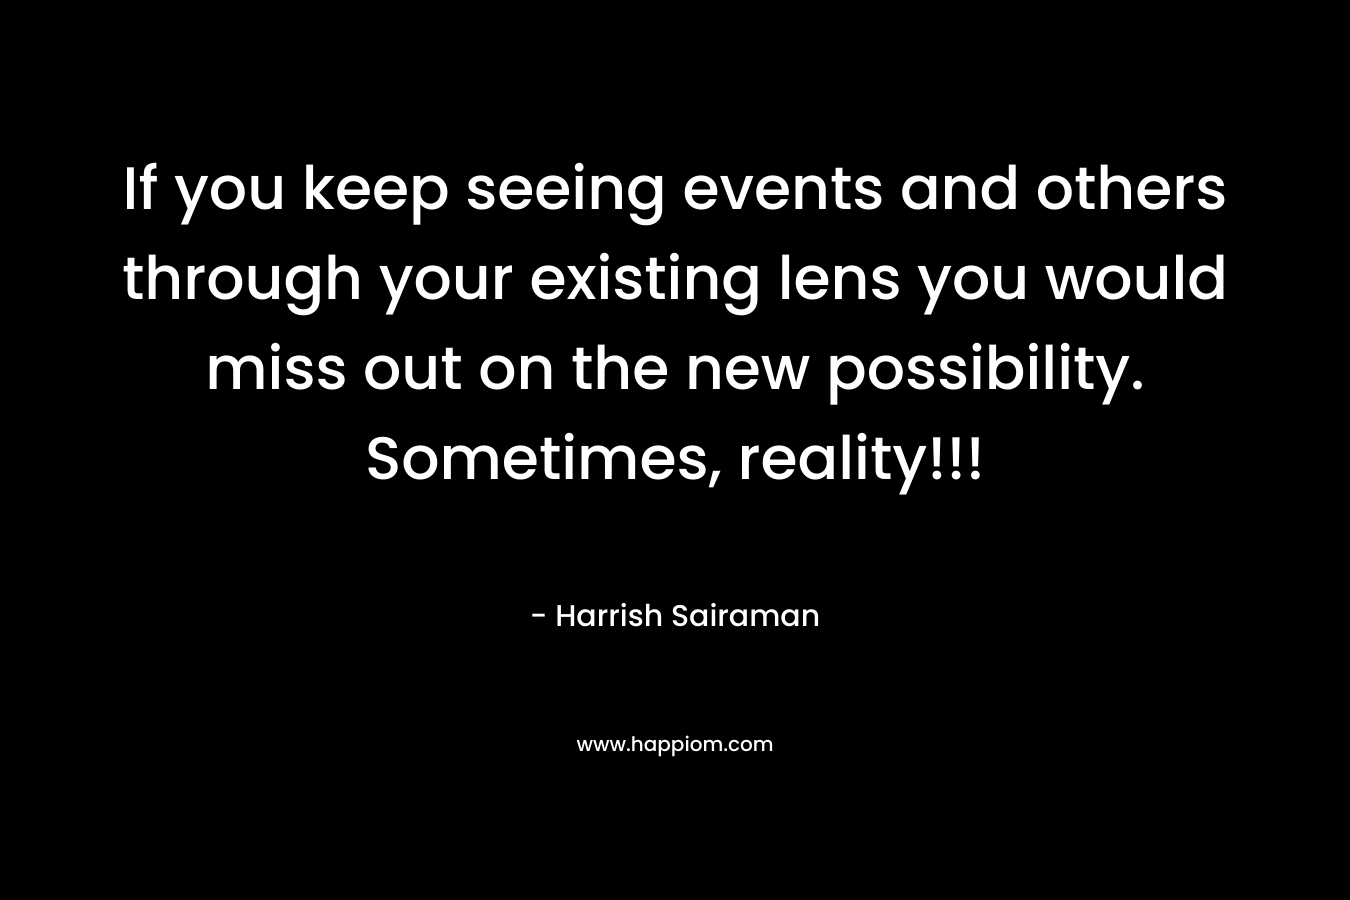 If you keep seeing events and others through your existing lens you would miss out on the new possibility. Sometimes, reality!!!